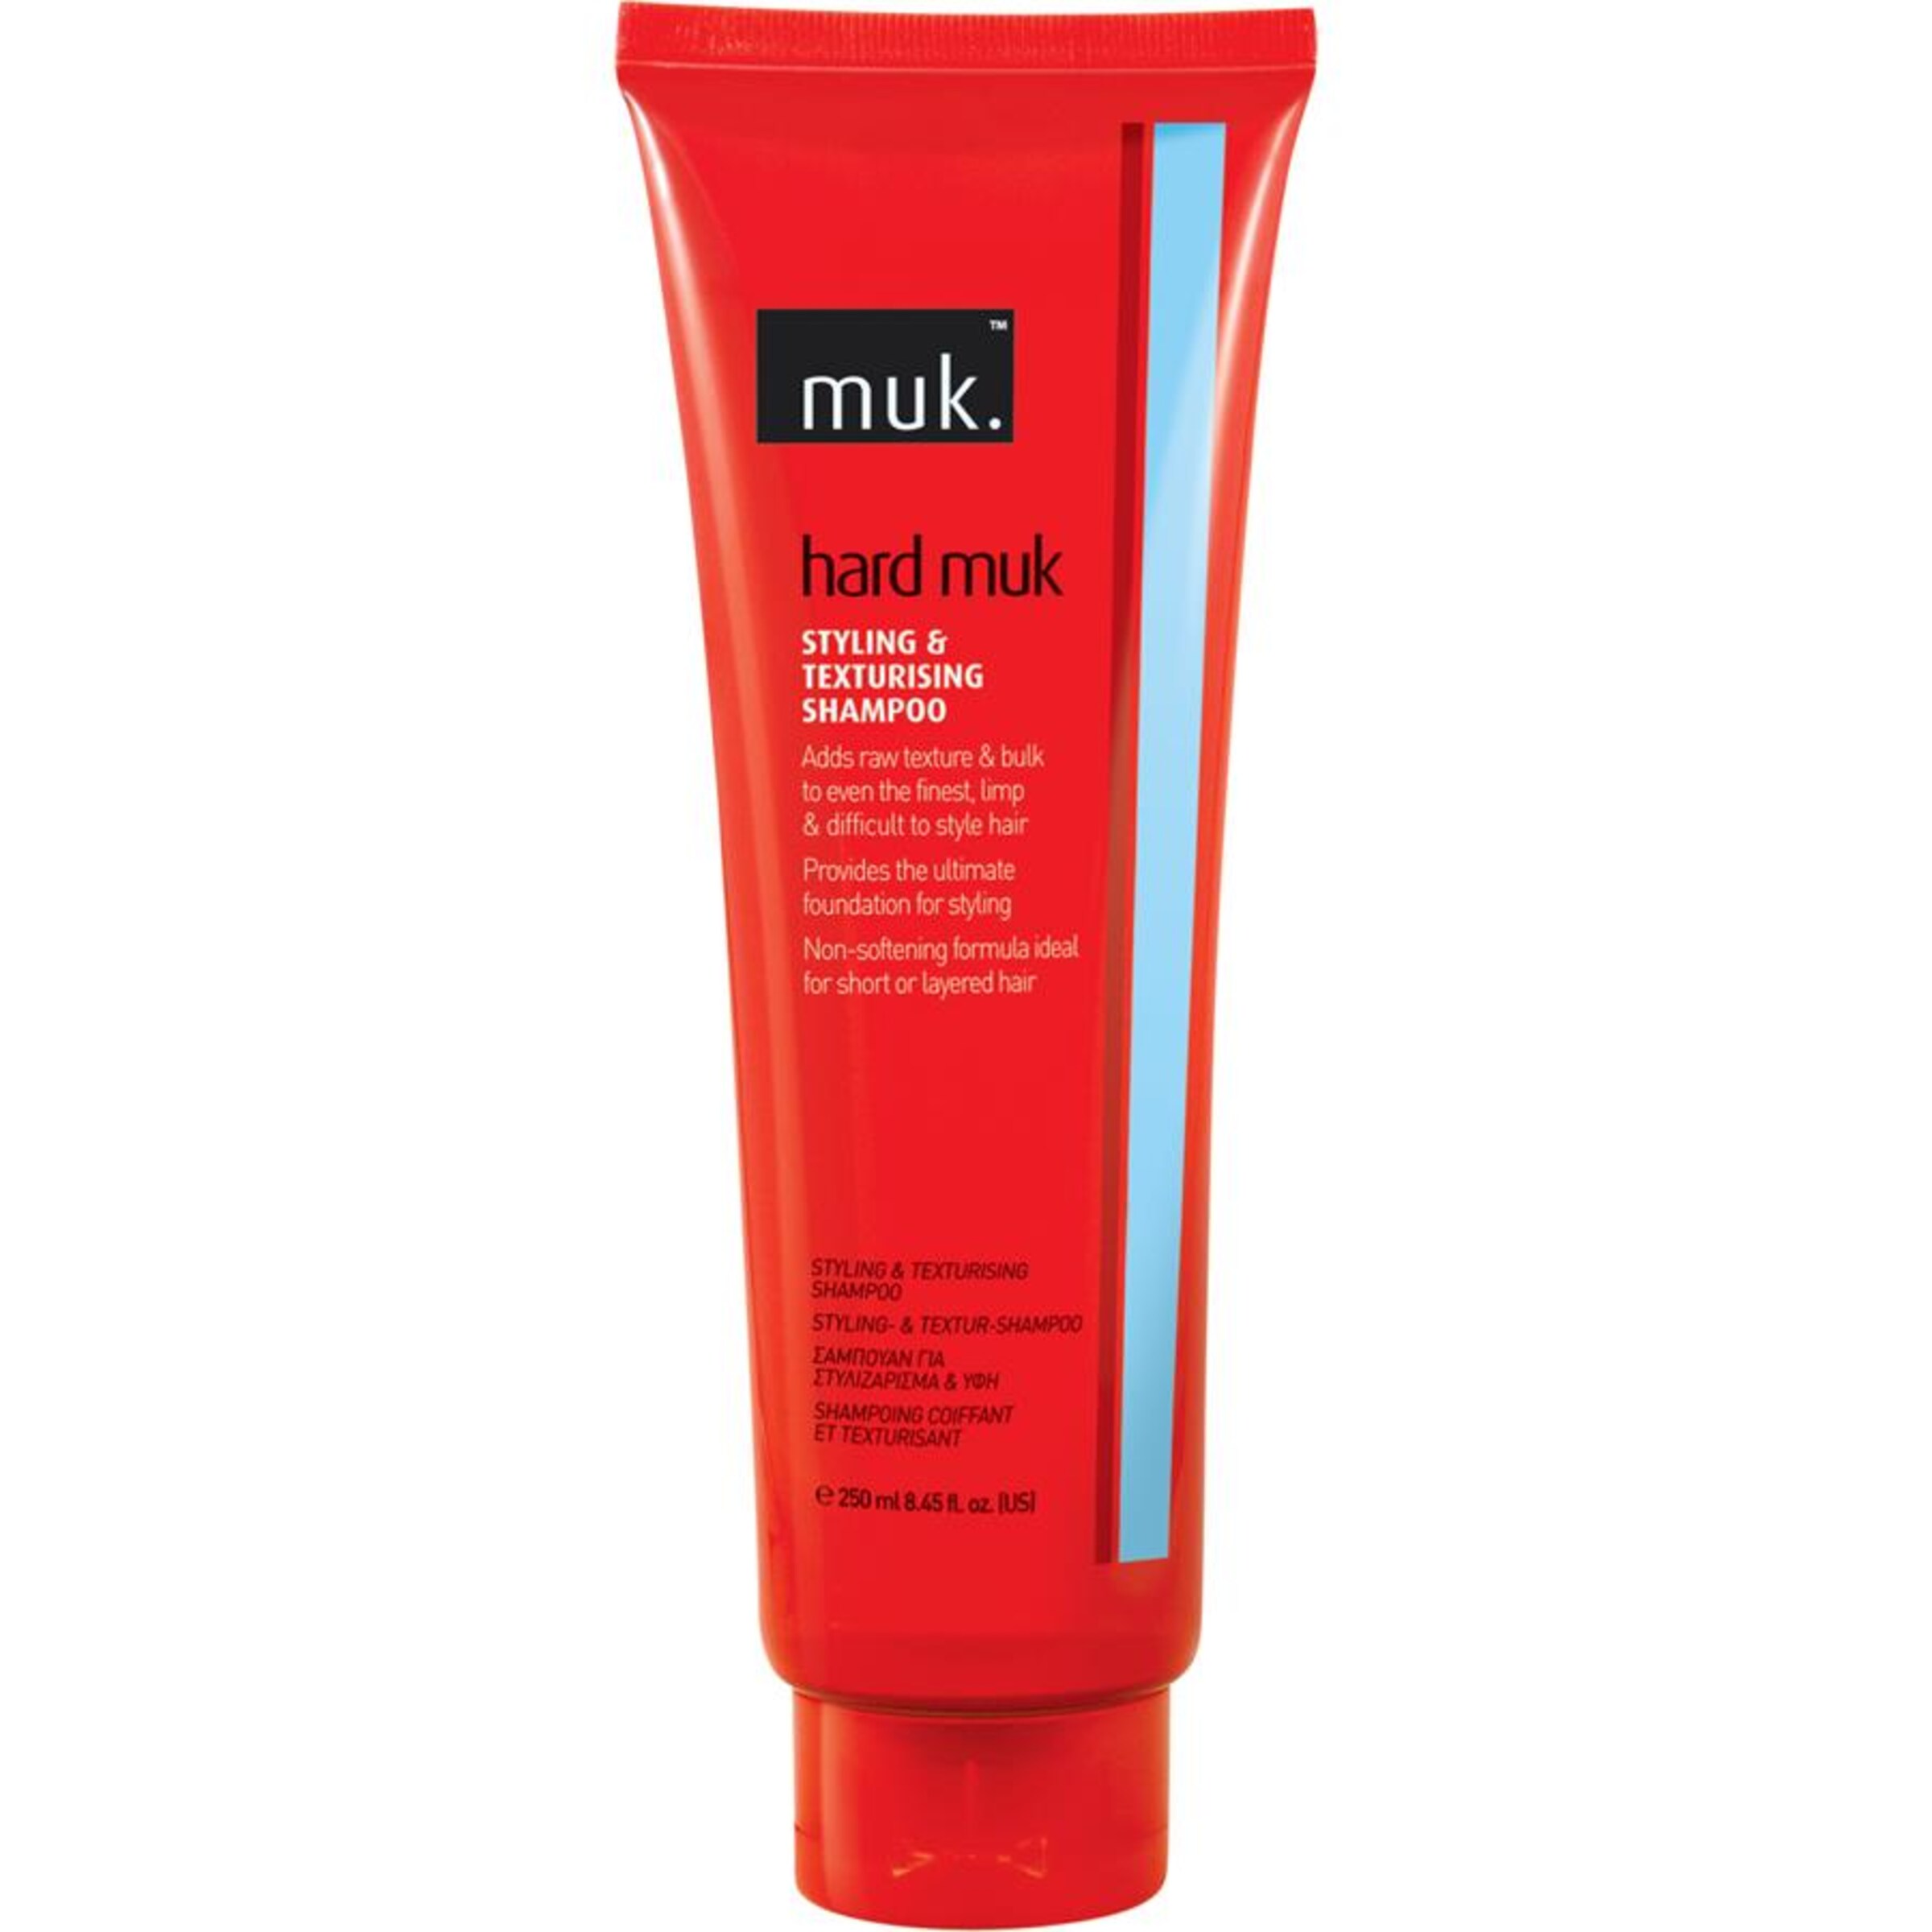 muk Haircare Haarshampoo Styling & Texturising in 